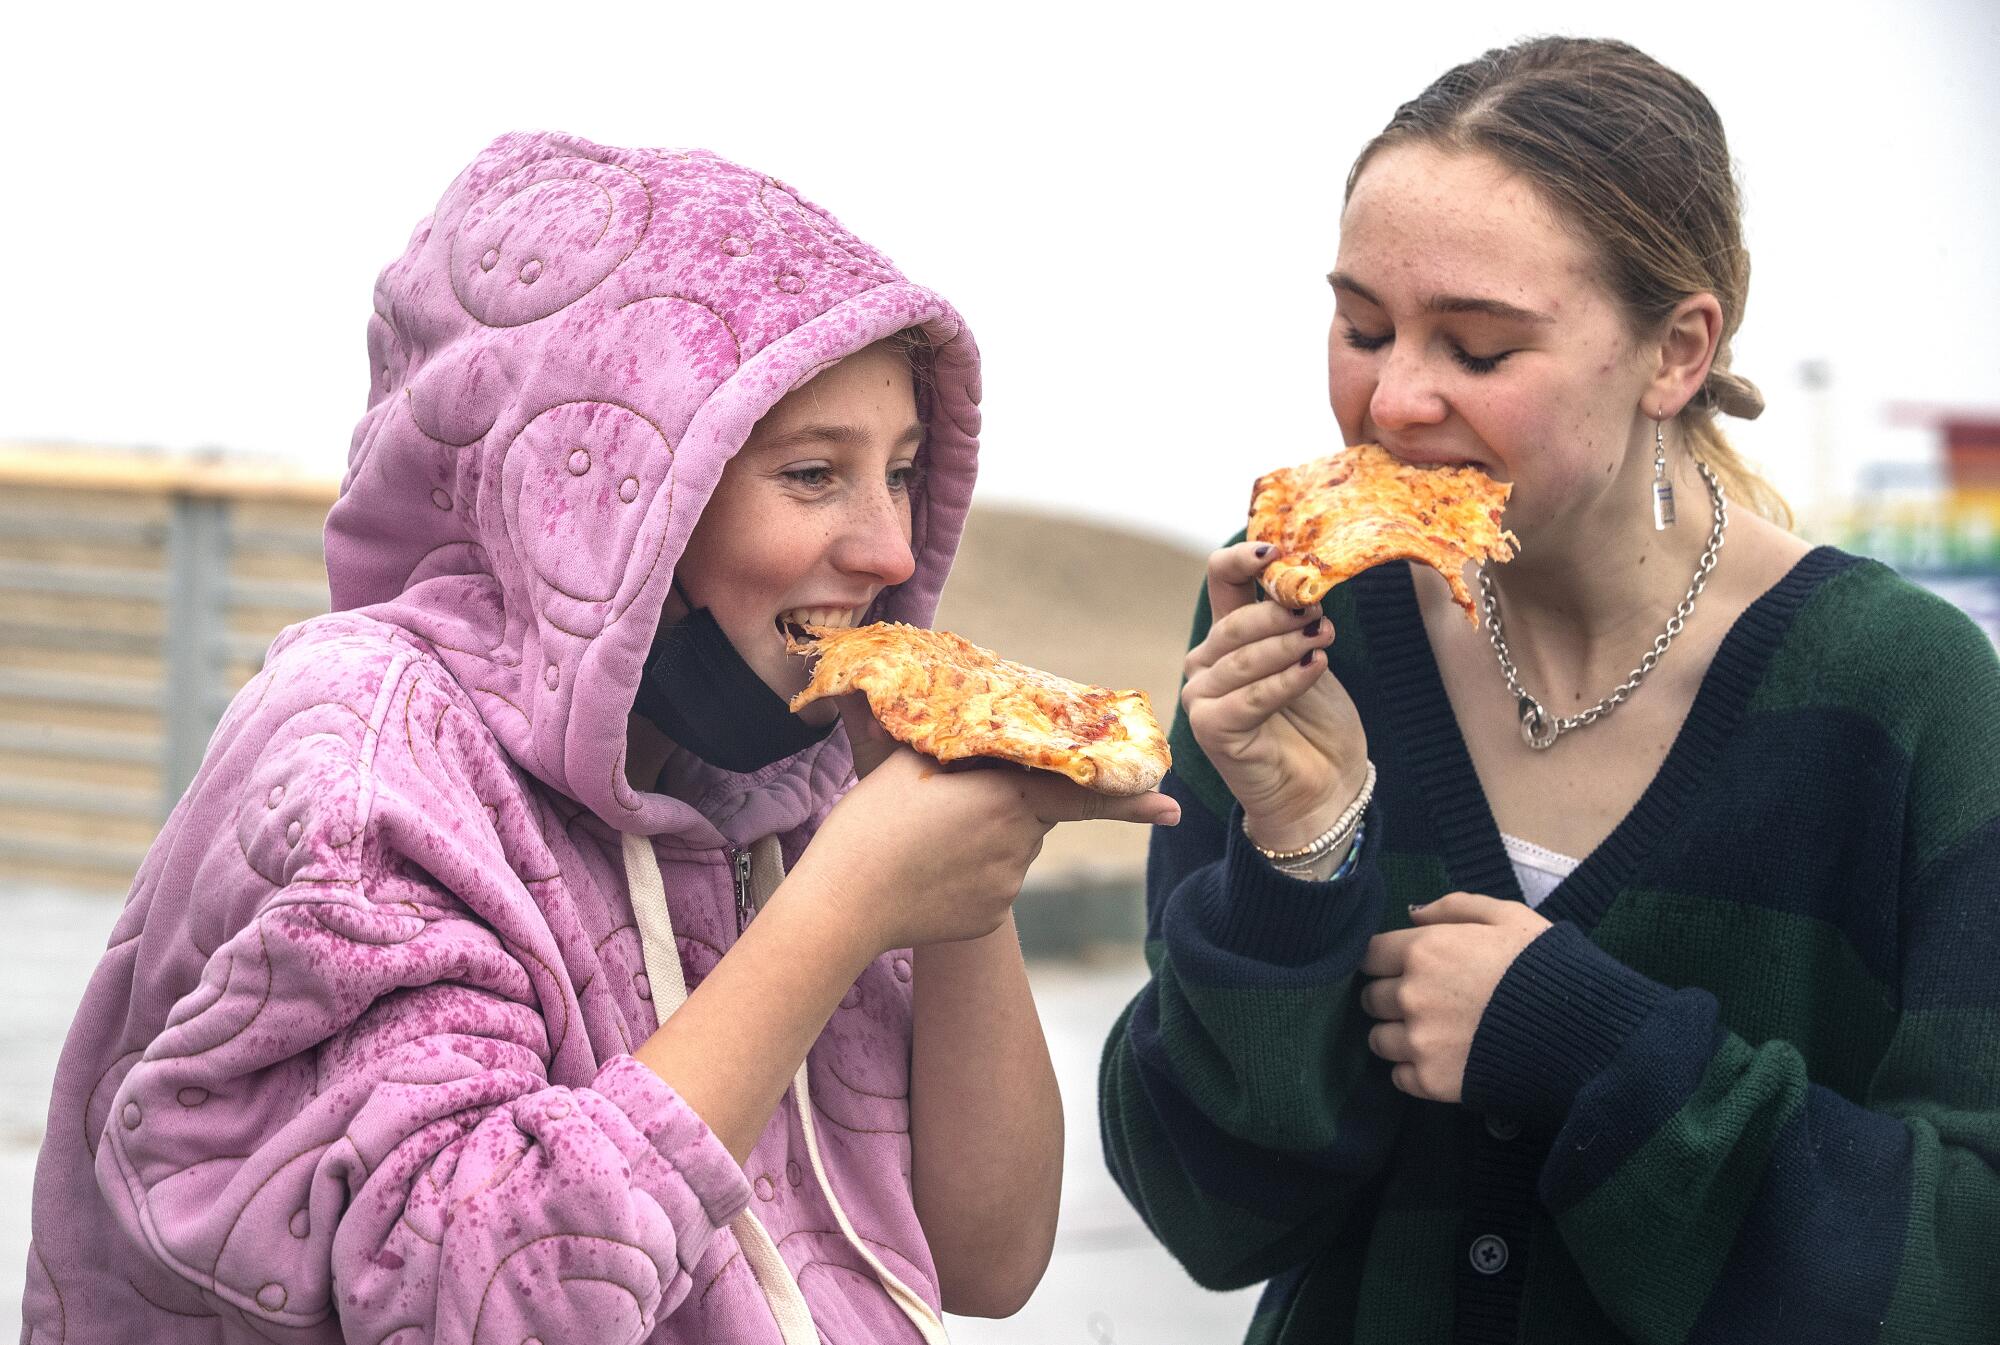 Two women eat slices of pizza